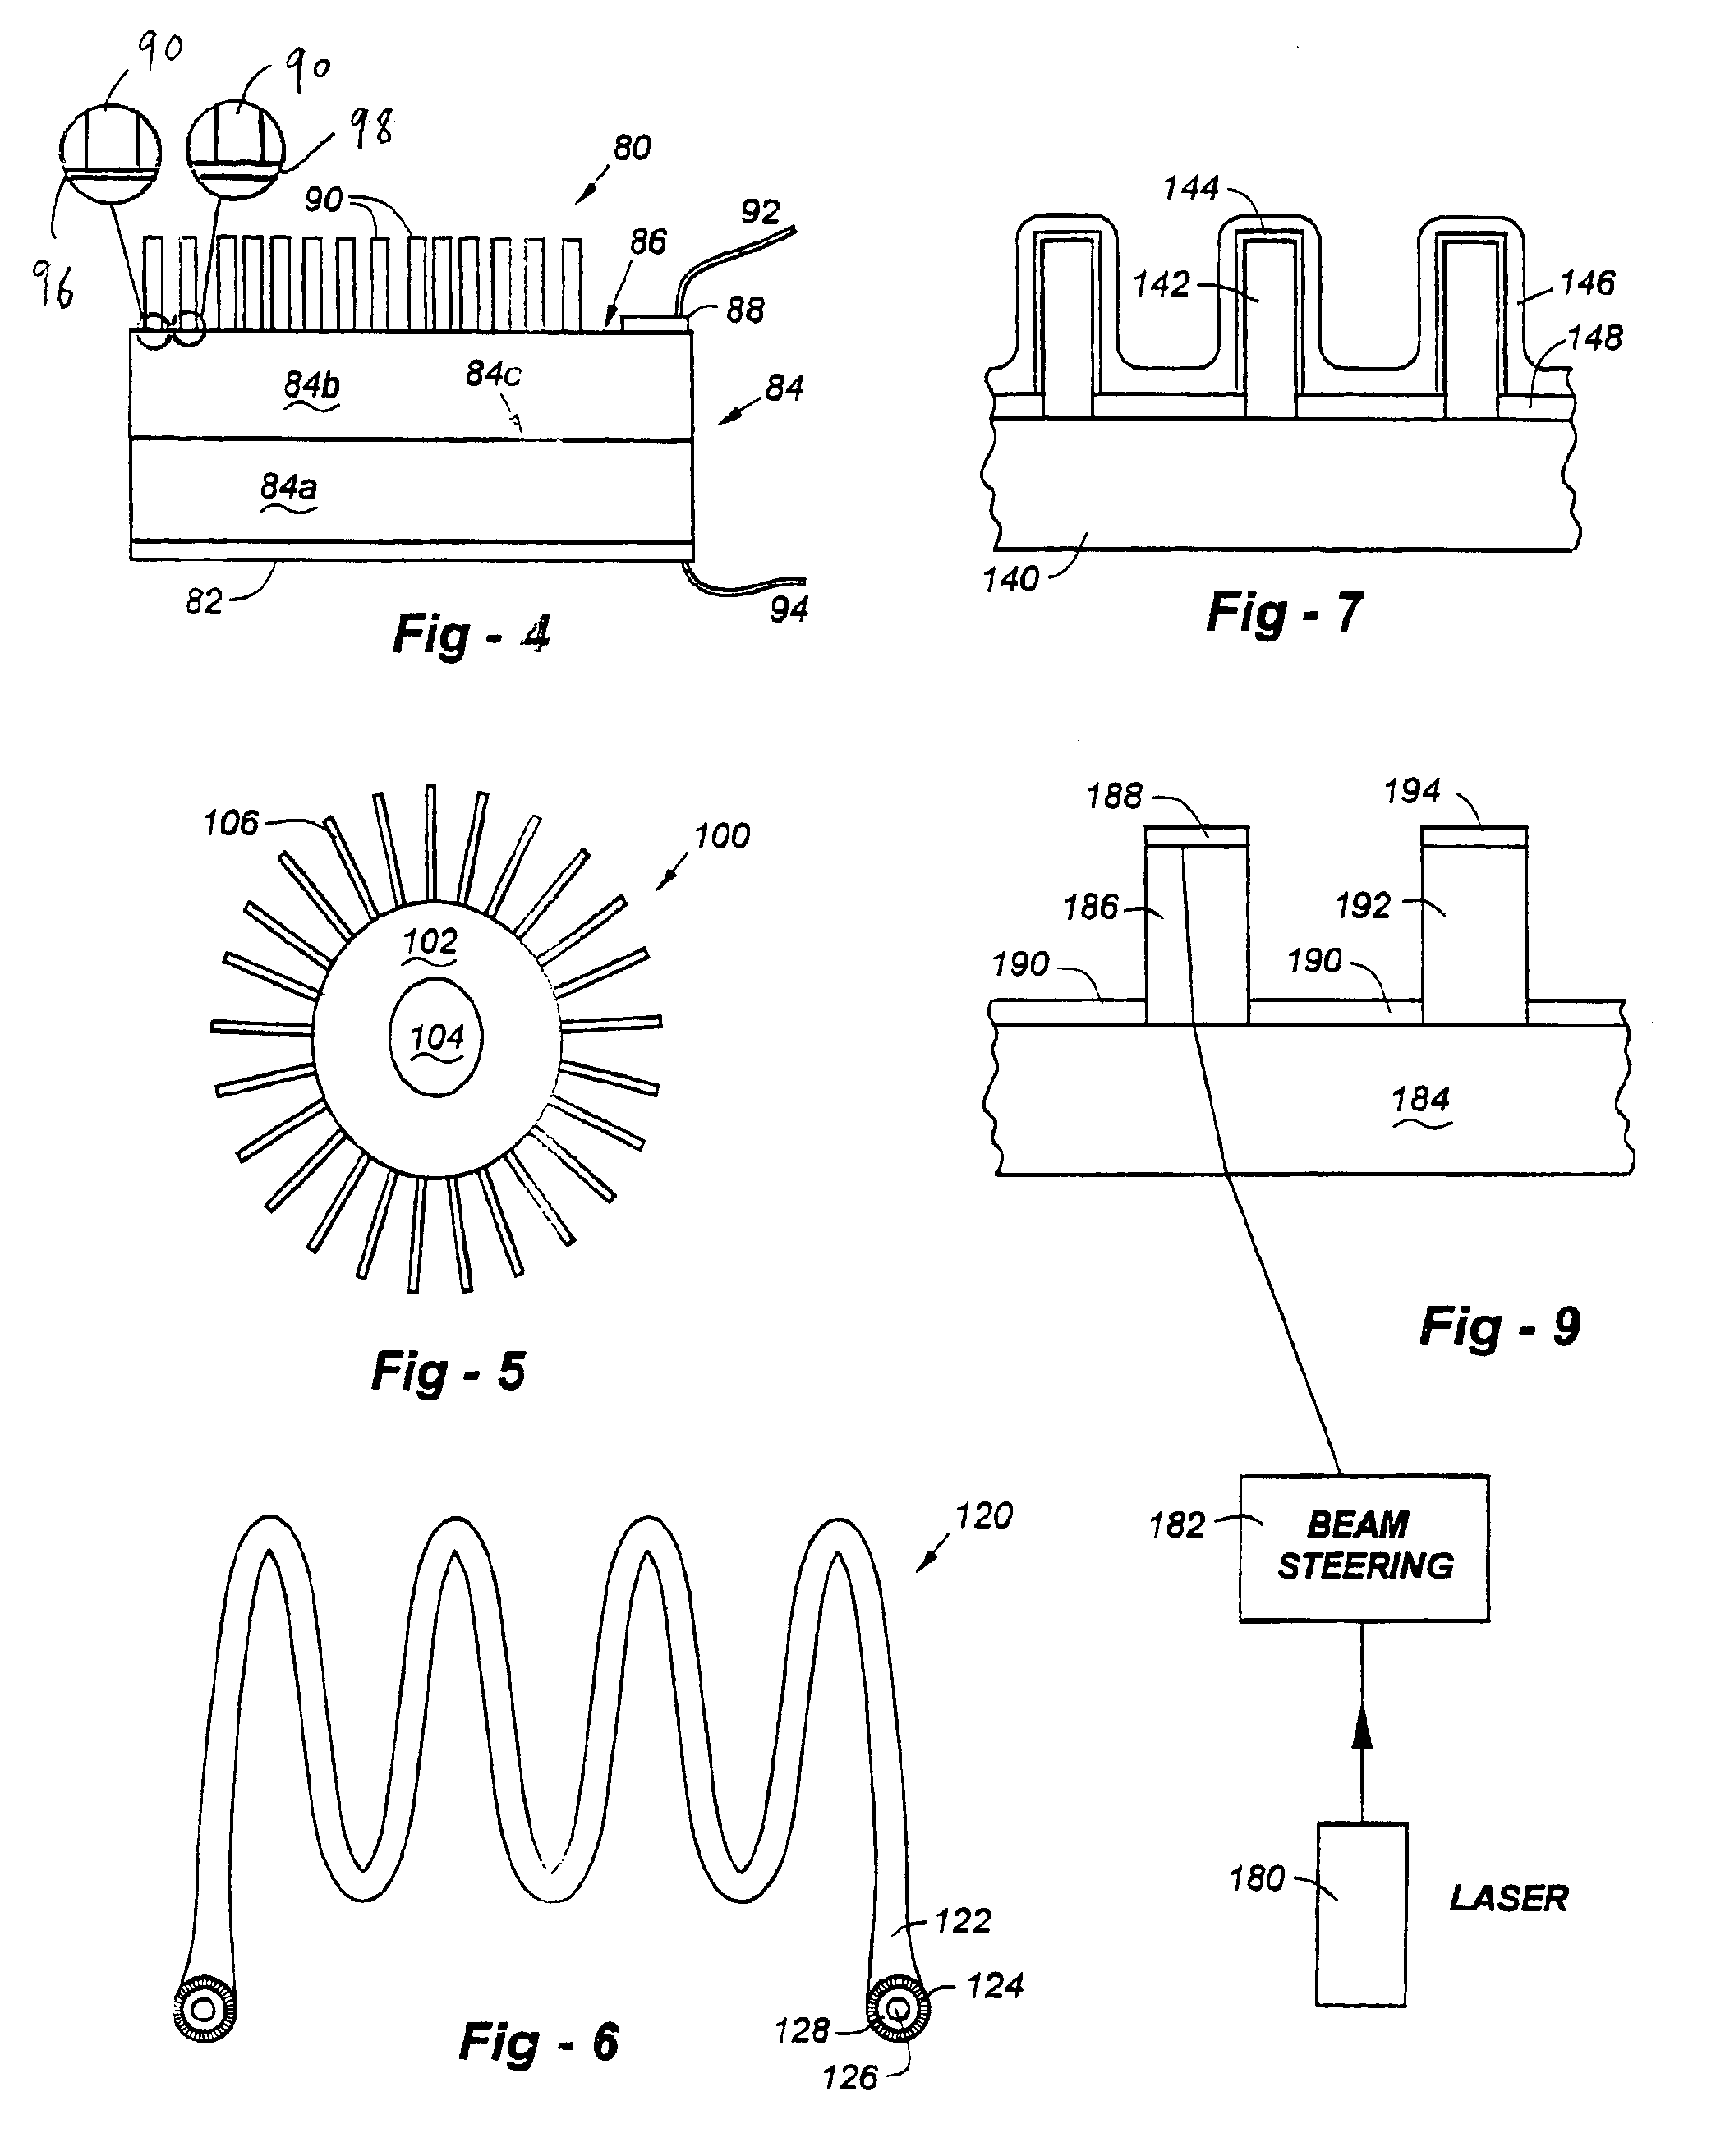 Optoelectronic devices employing fibers for light collection and emission